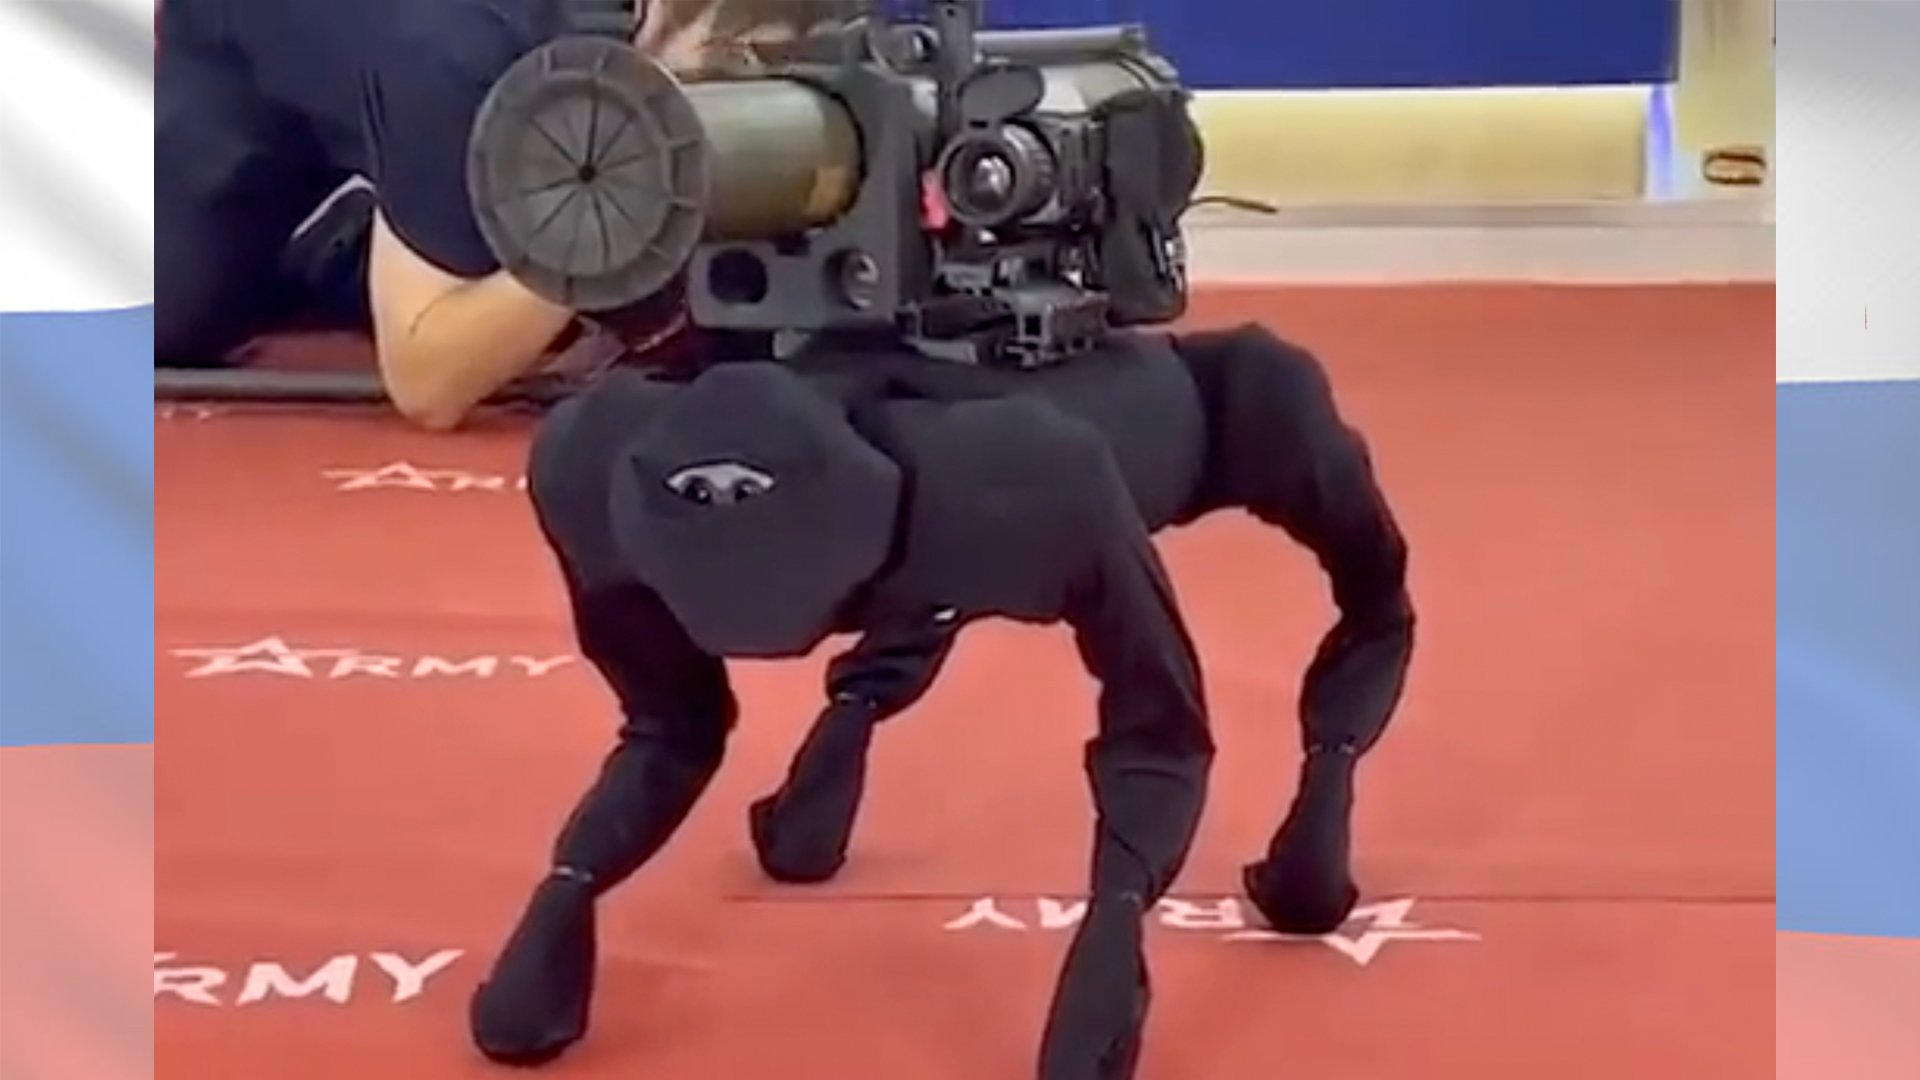 A robot “dog” carrying a rocket-propelled-grenade launcher was a breakout star of the first day of the Russian ARMY 2022 trade show in Moscow, which is often a showcase for new Russian technology and weapons. But internet sleuths soon found that the “dog” was a Chinese toylike model with a battery life of about one hour. Screenshot via Twitter video.